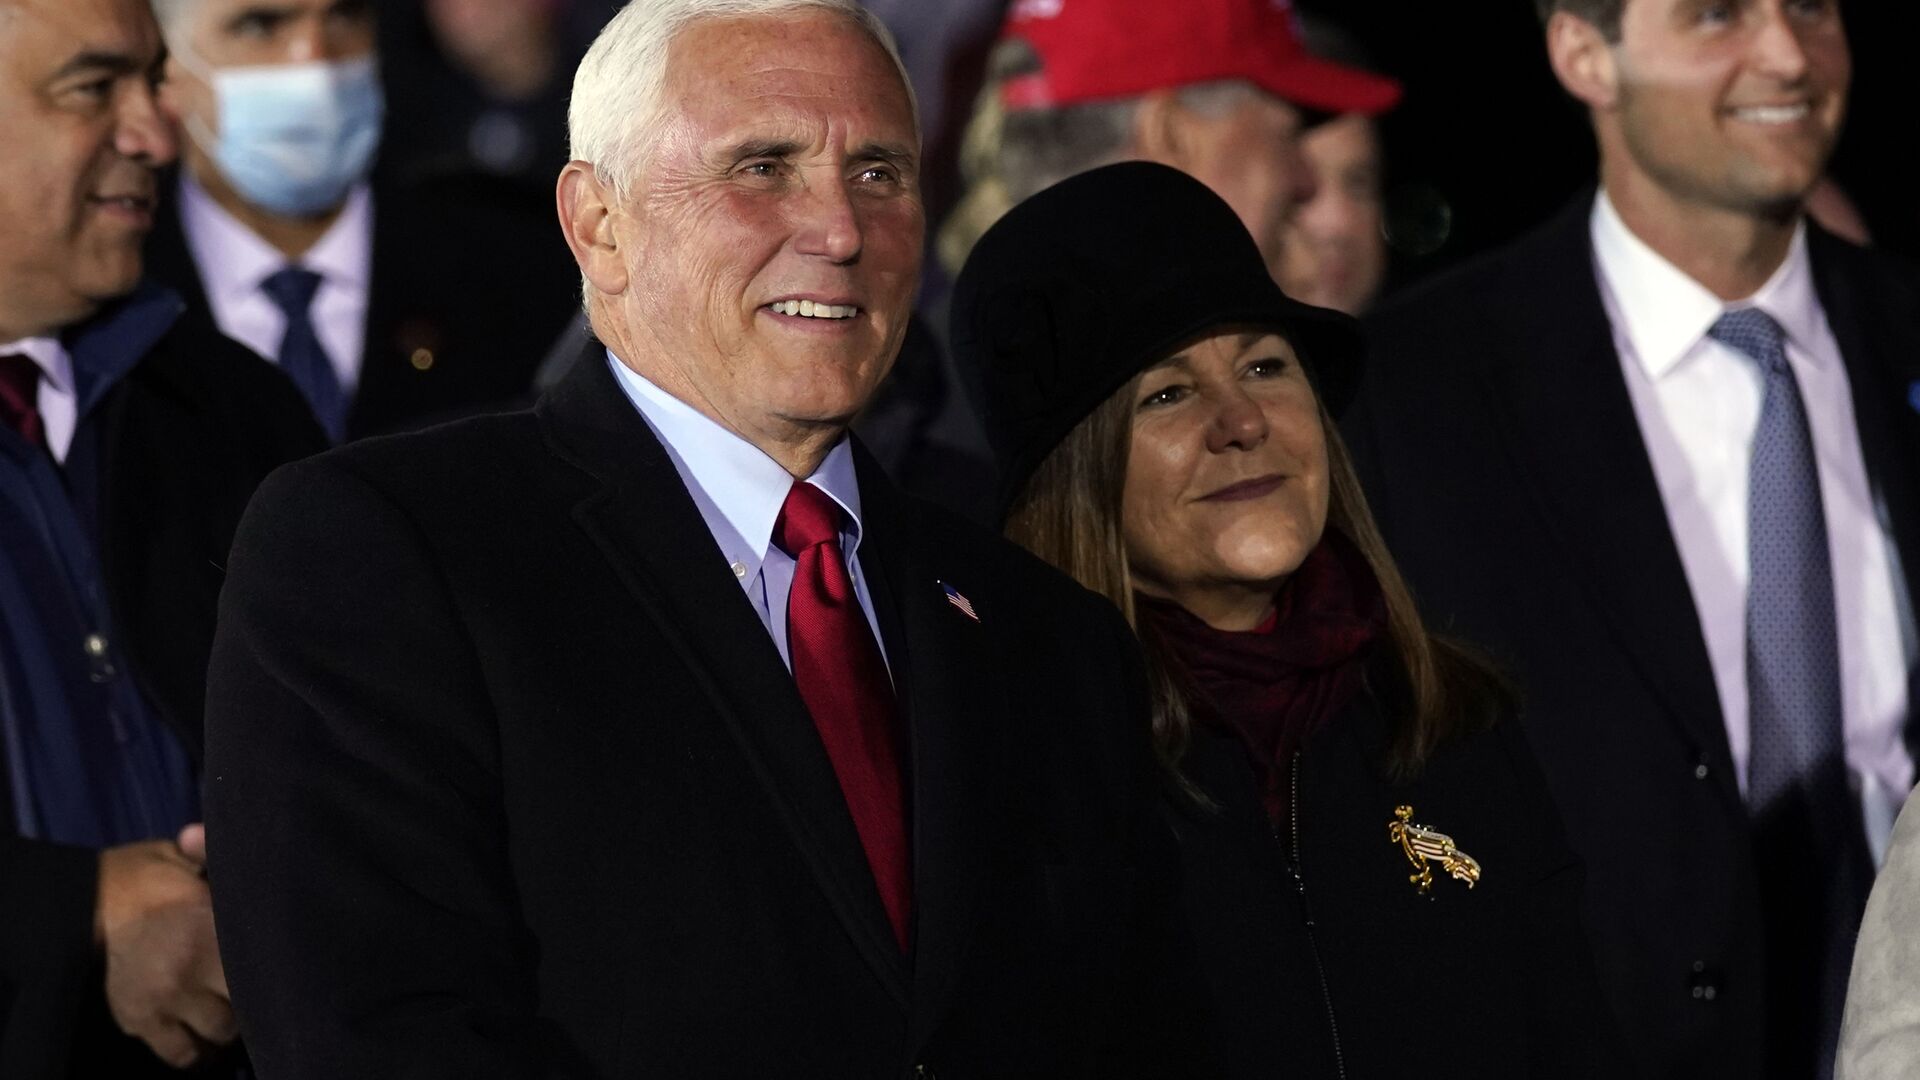 Vice President Mike Pence and his wife Karen listen as President Donald Trump speaks during a campaign rally at Gerald R. Ford International Airport, early Tuesday, Nov. 3, 2020, in Grand Rapids, Mich. - Sputnik International, 1920, 14.03.2021